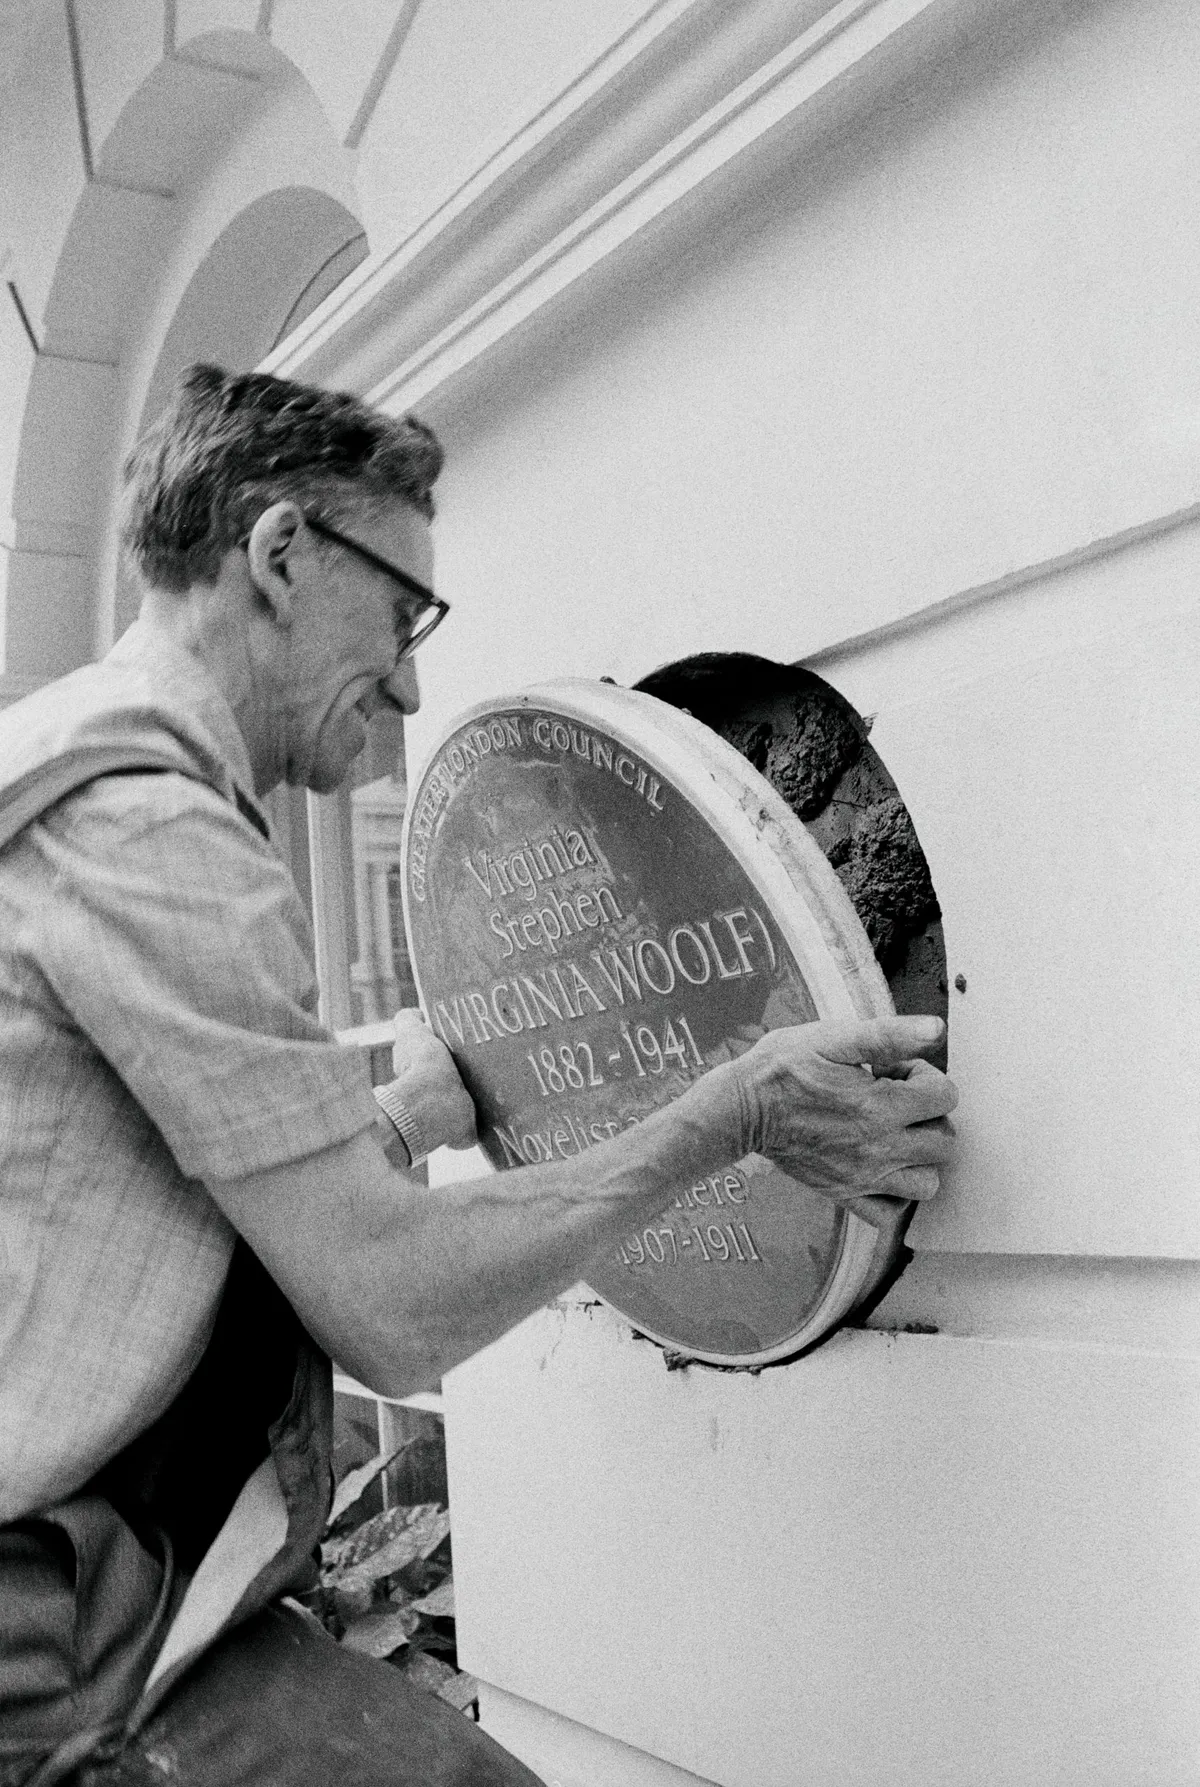 Frank Barnes places the Virginia Woolf Blue Plaque on a London building